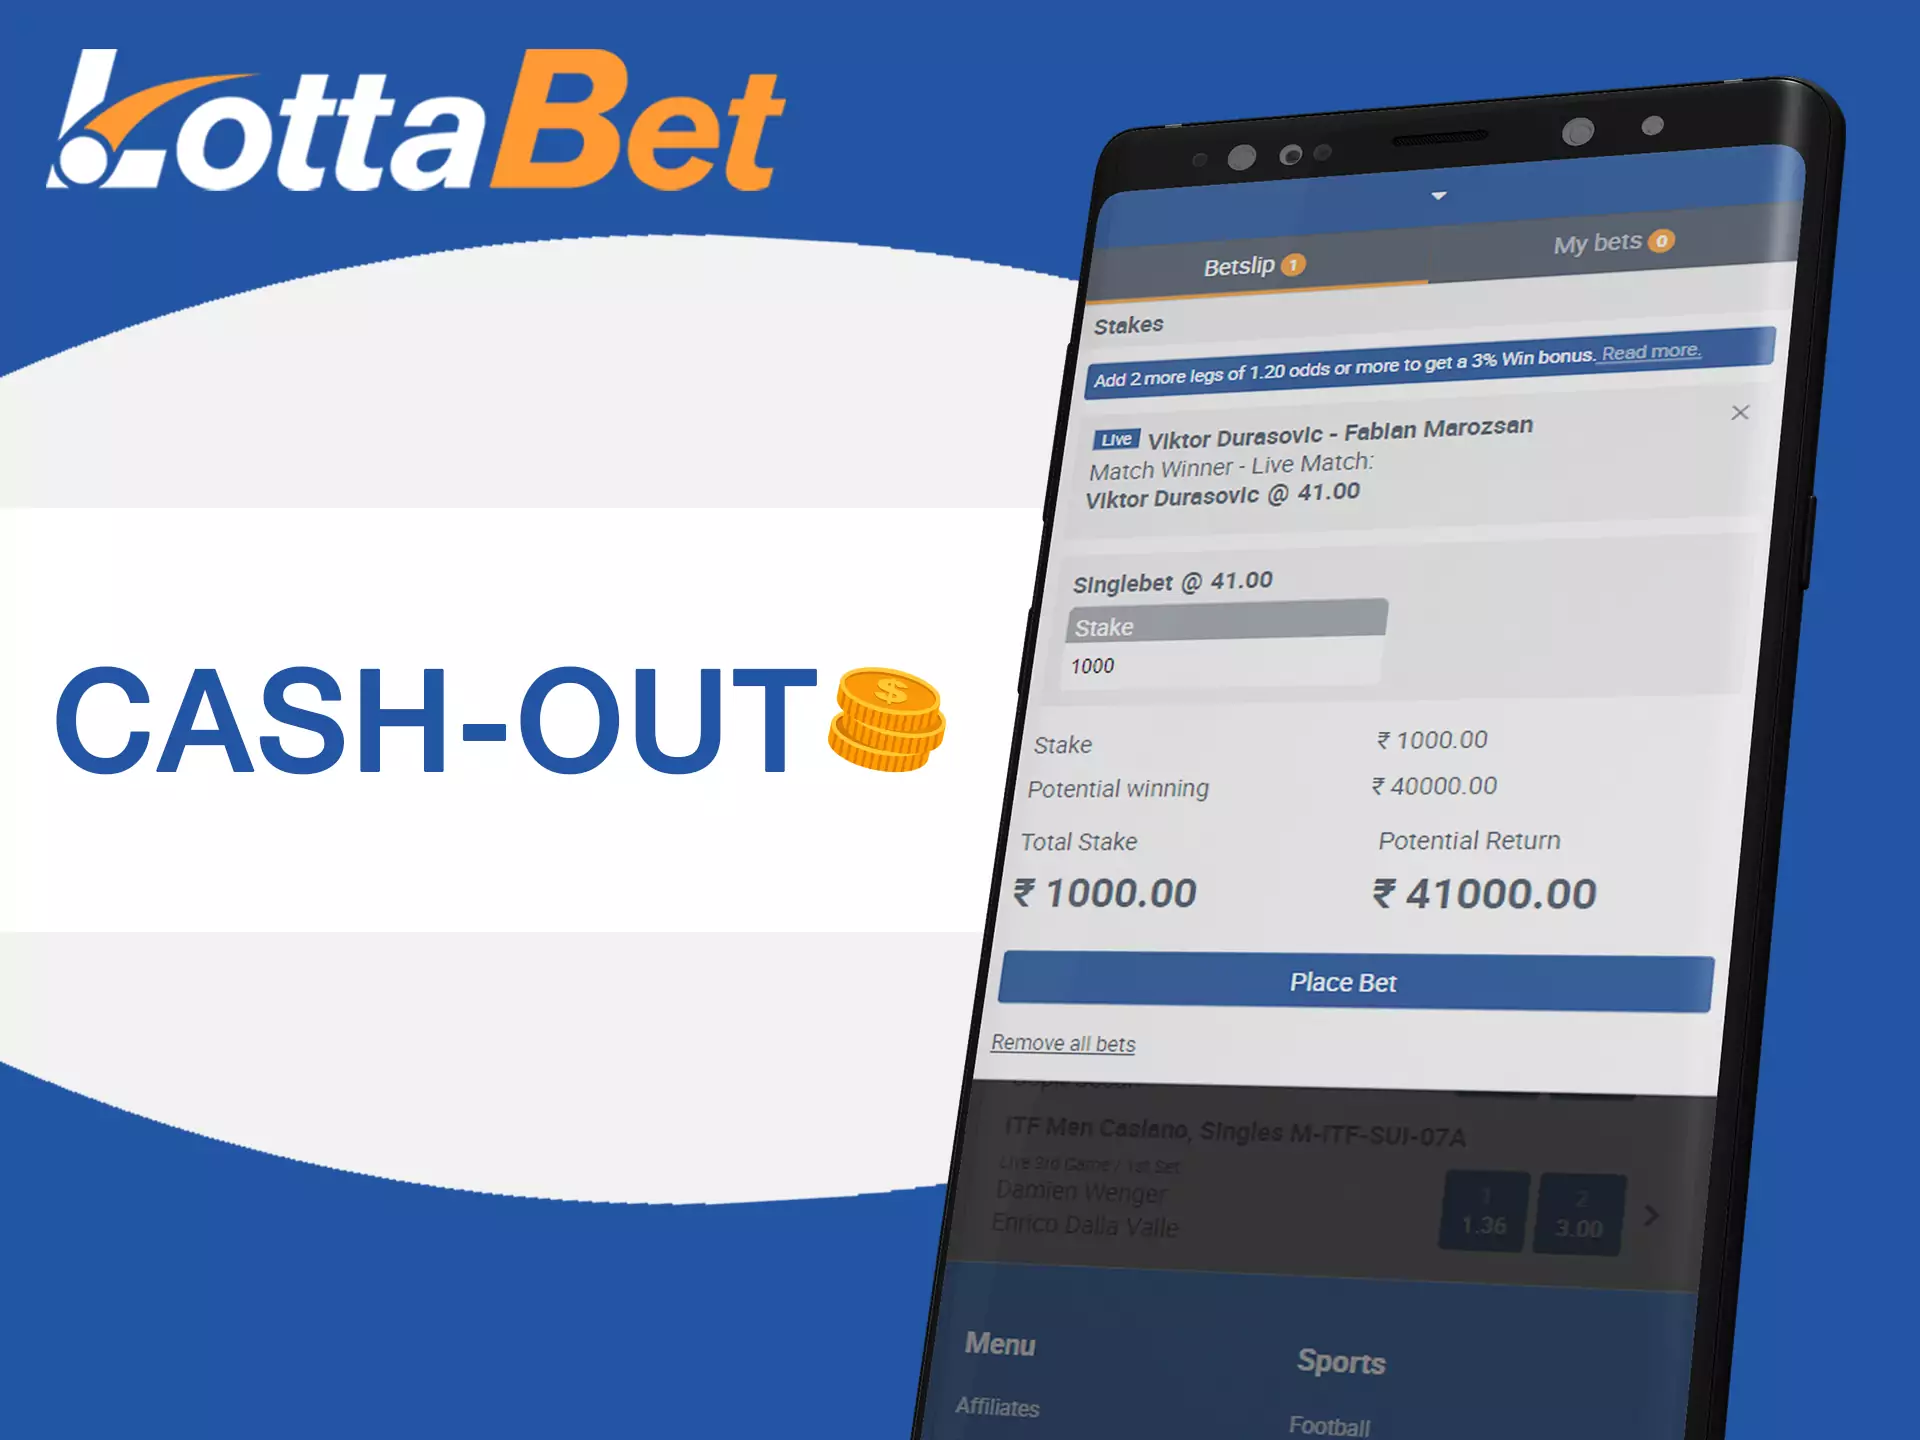 Withdraw funds automatically after successful bets.